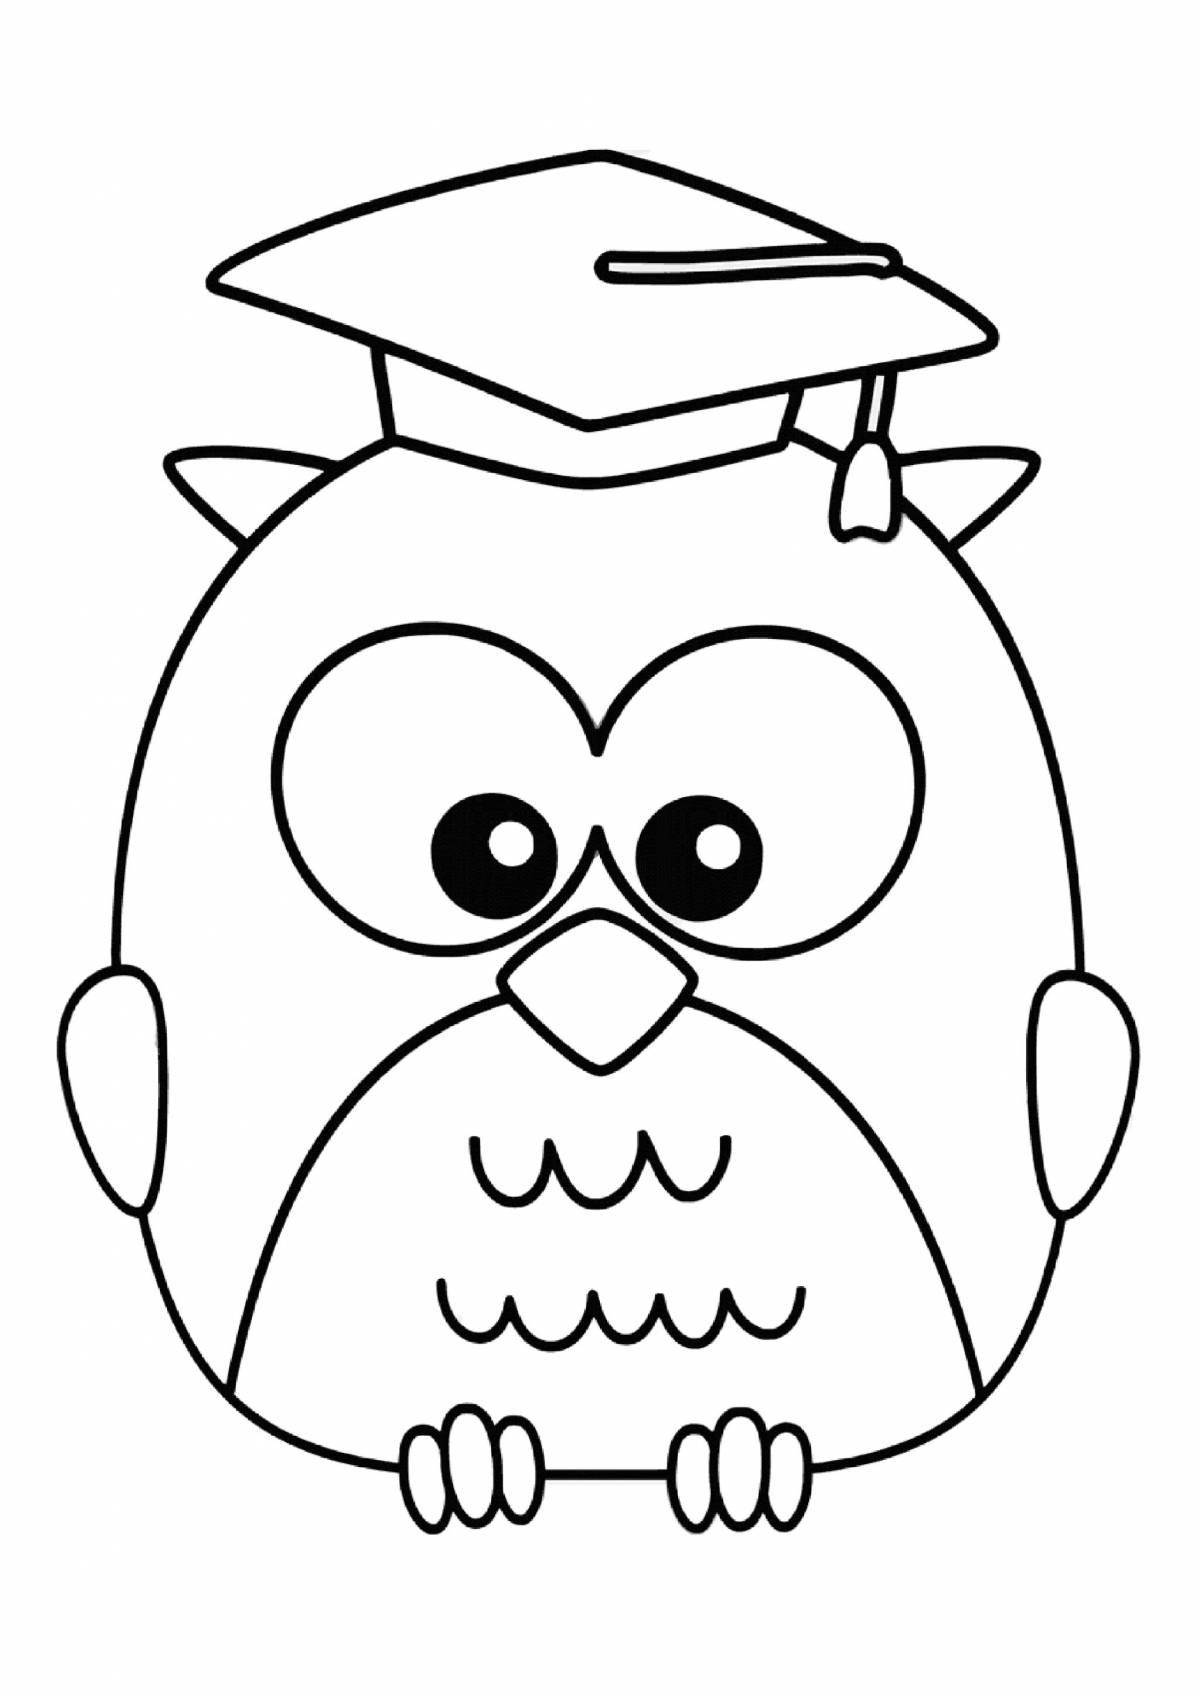 Magic owl coloring book for 3-4 year olds